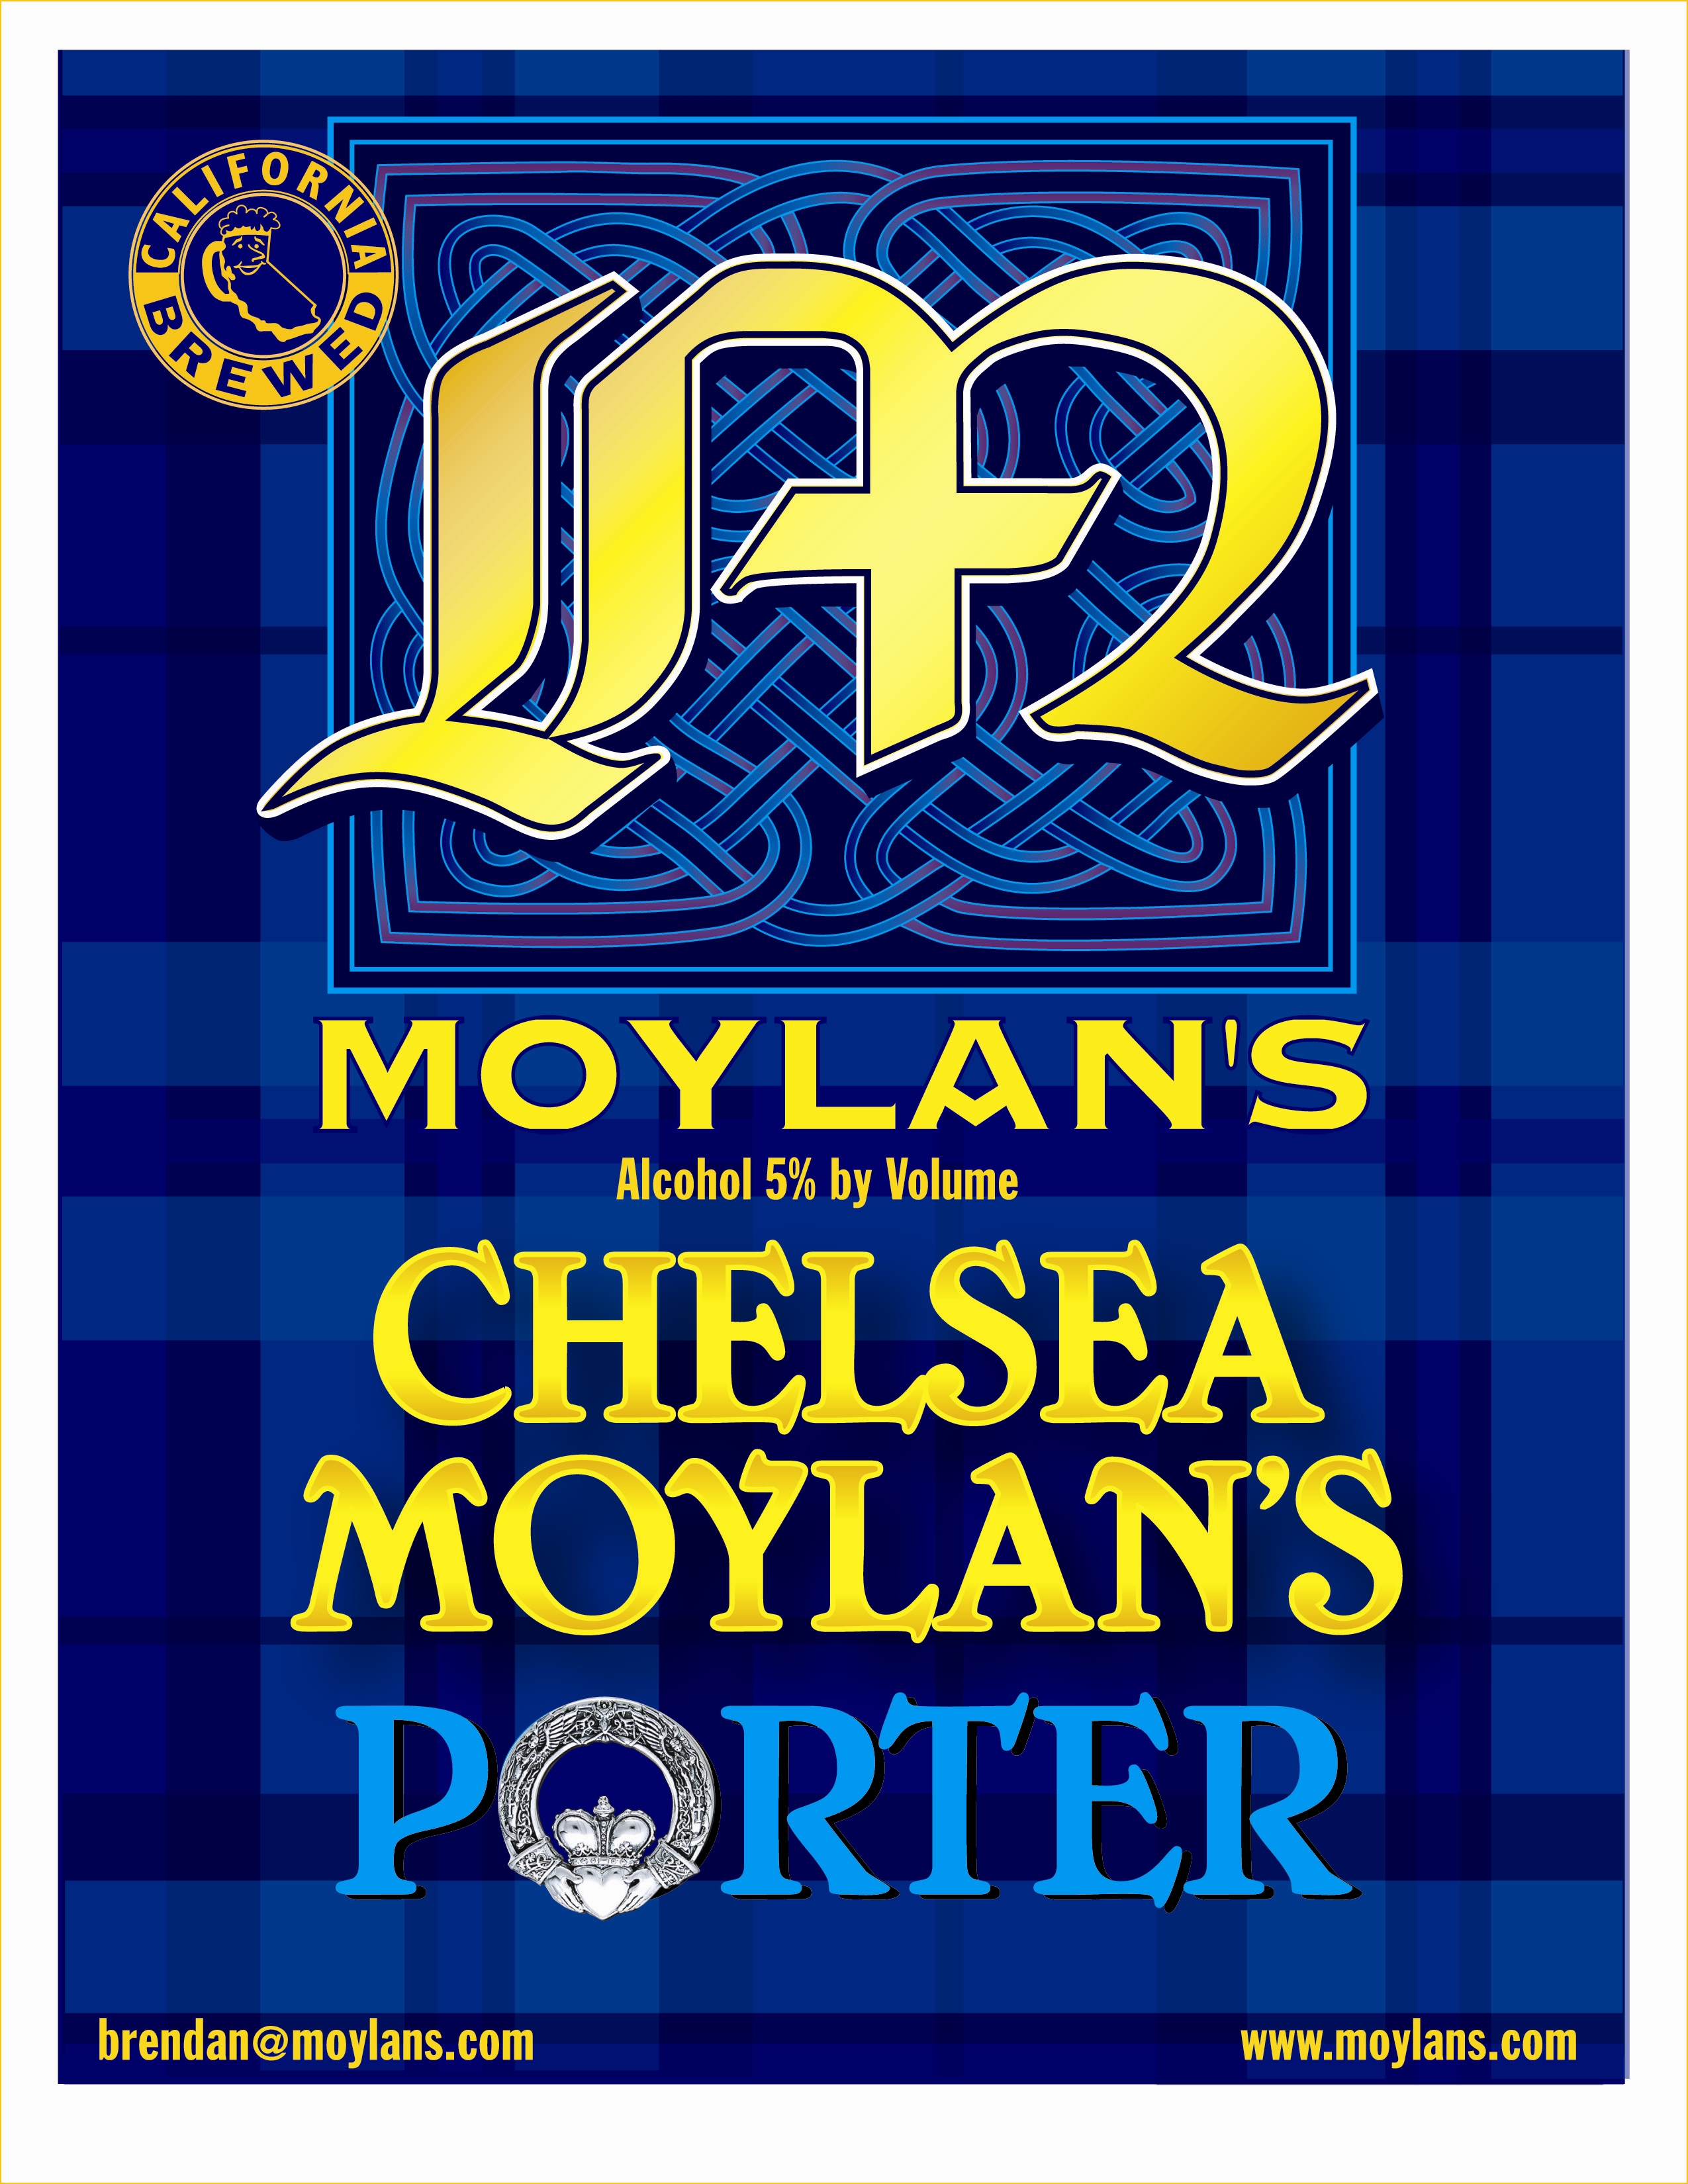 New Beer From Moylan’s